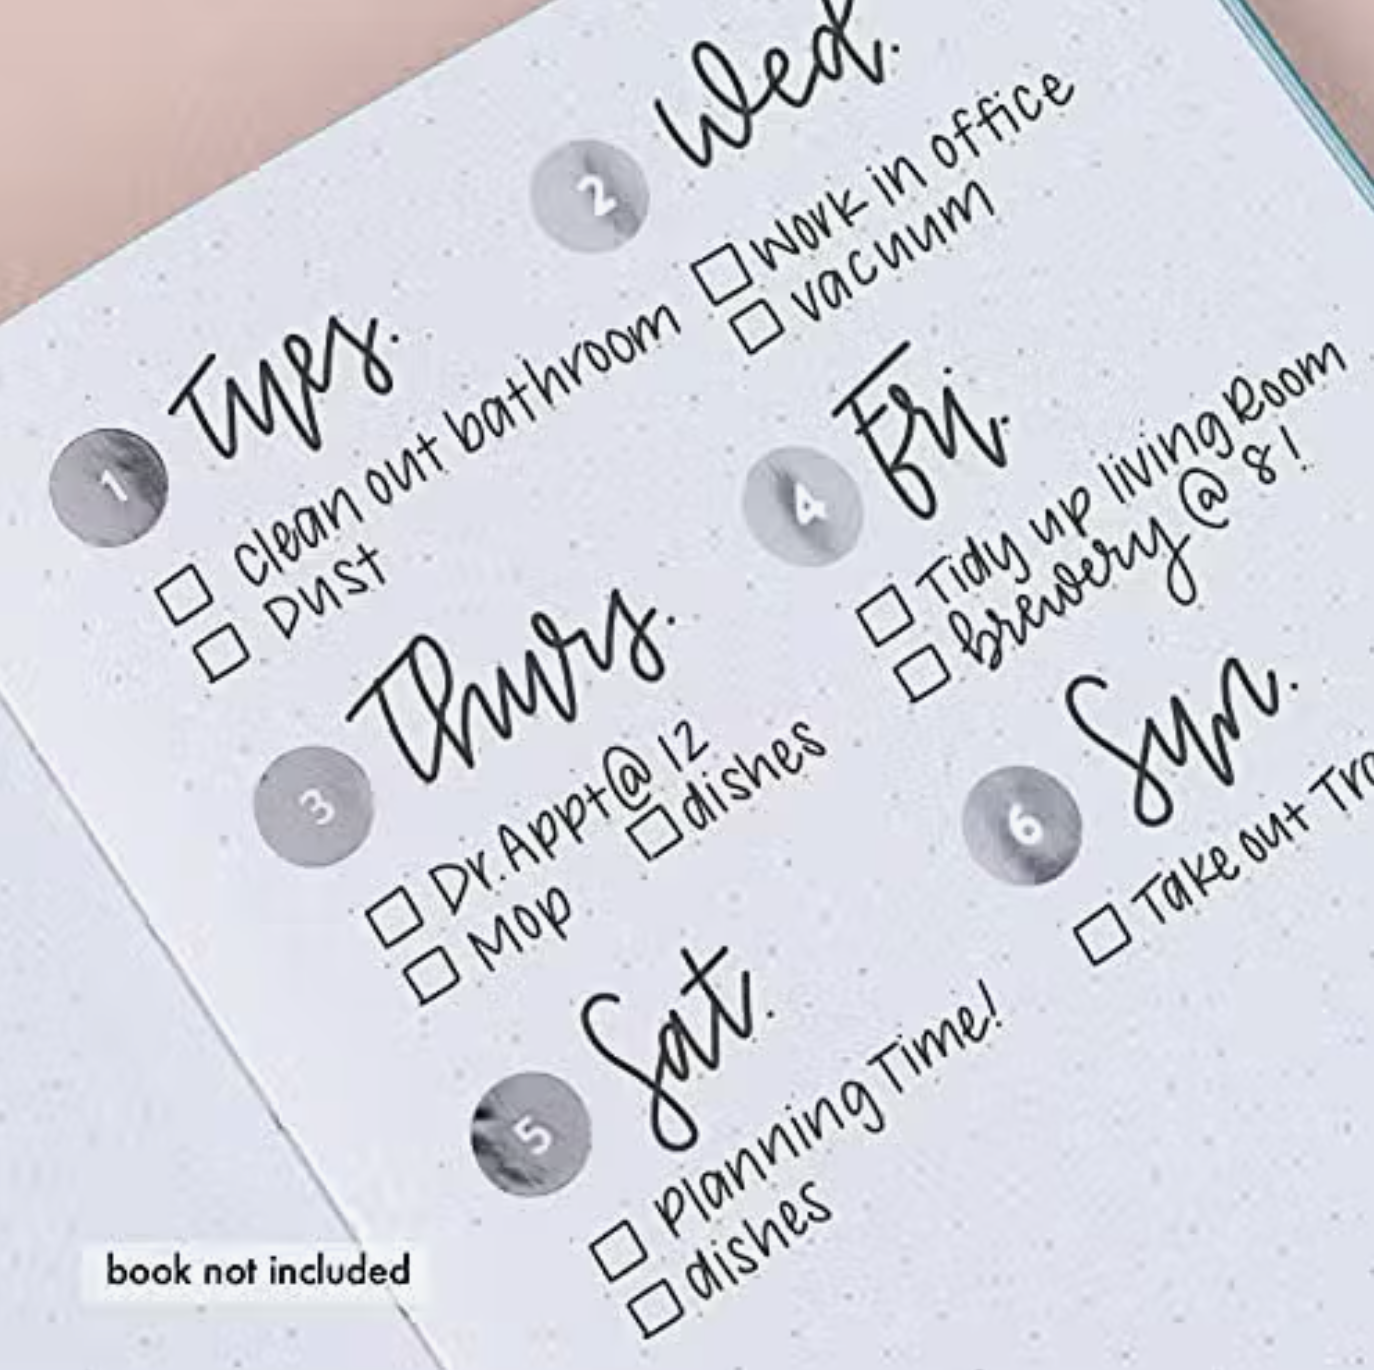 Keep track of your dates with our Date Dots Planner Sticker Pack. This pack includes a variety of circular stickers with date numbers, ideal for adding a functional and decorative element to your planner spreads. This tape is sold at BBB Supplies Craft Shop.